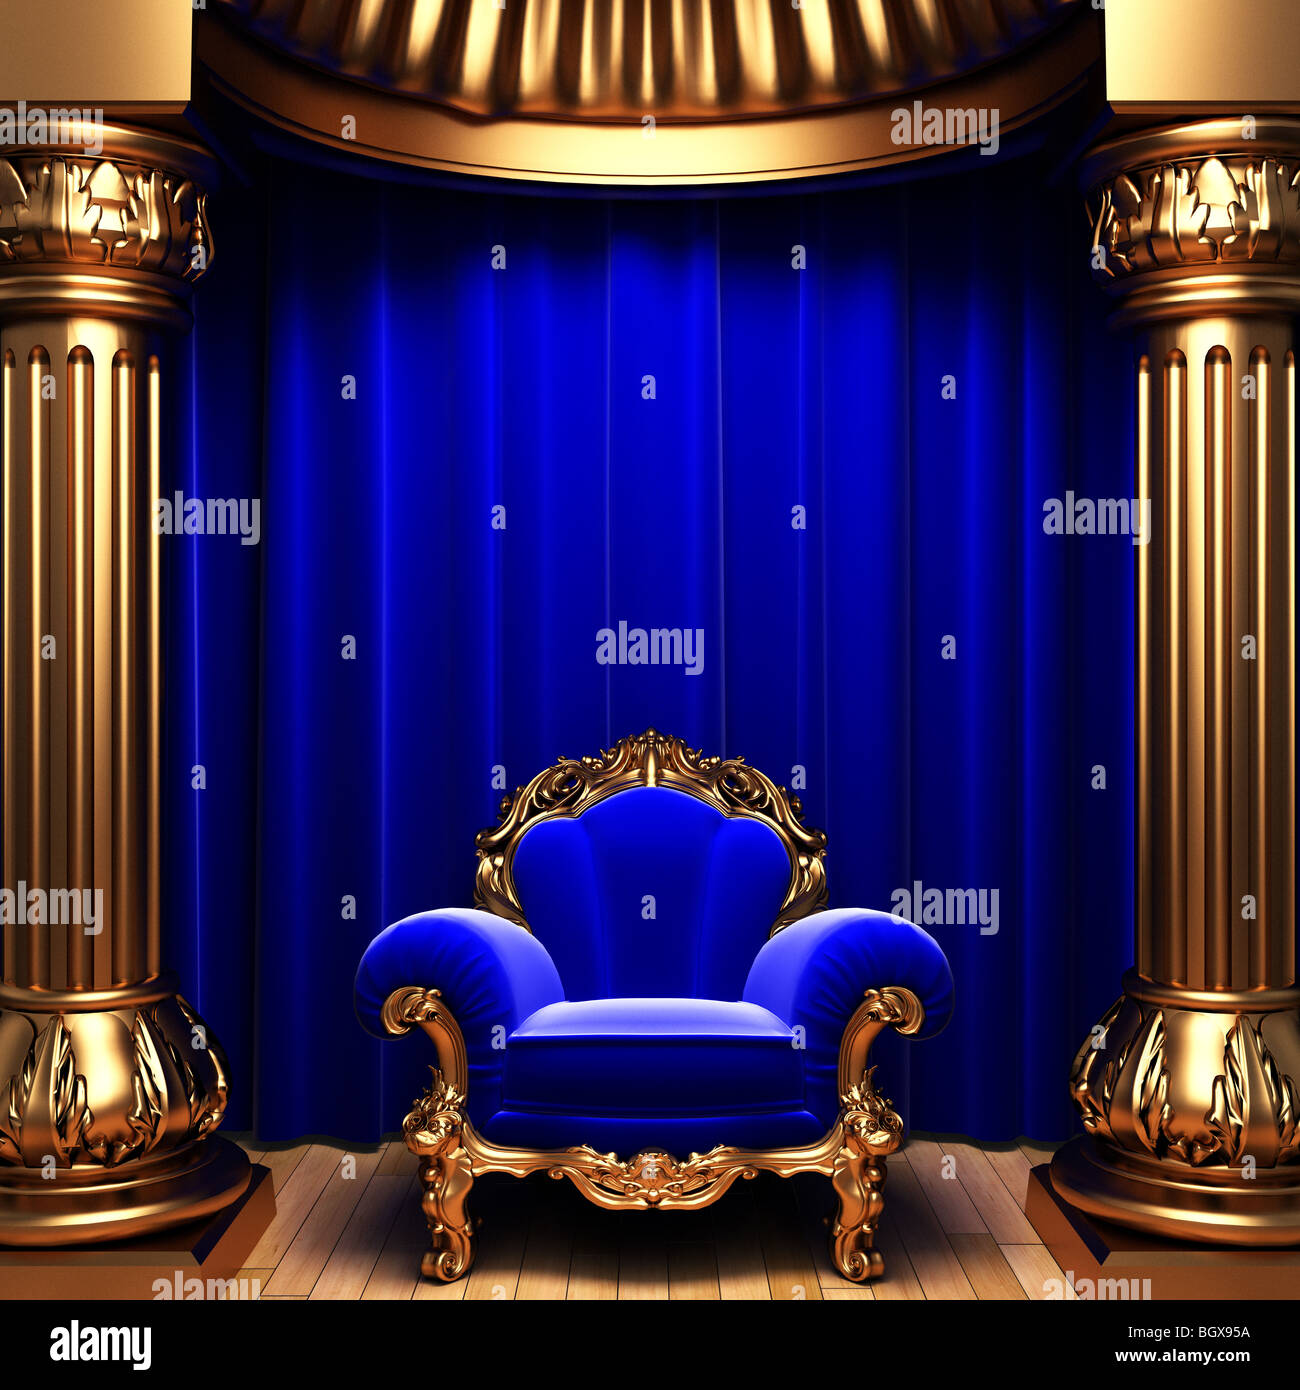 blue velvet curtains, gold columns and chair Stock Photo